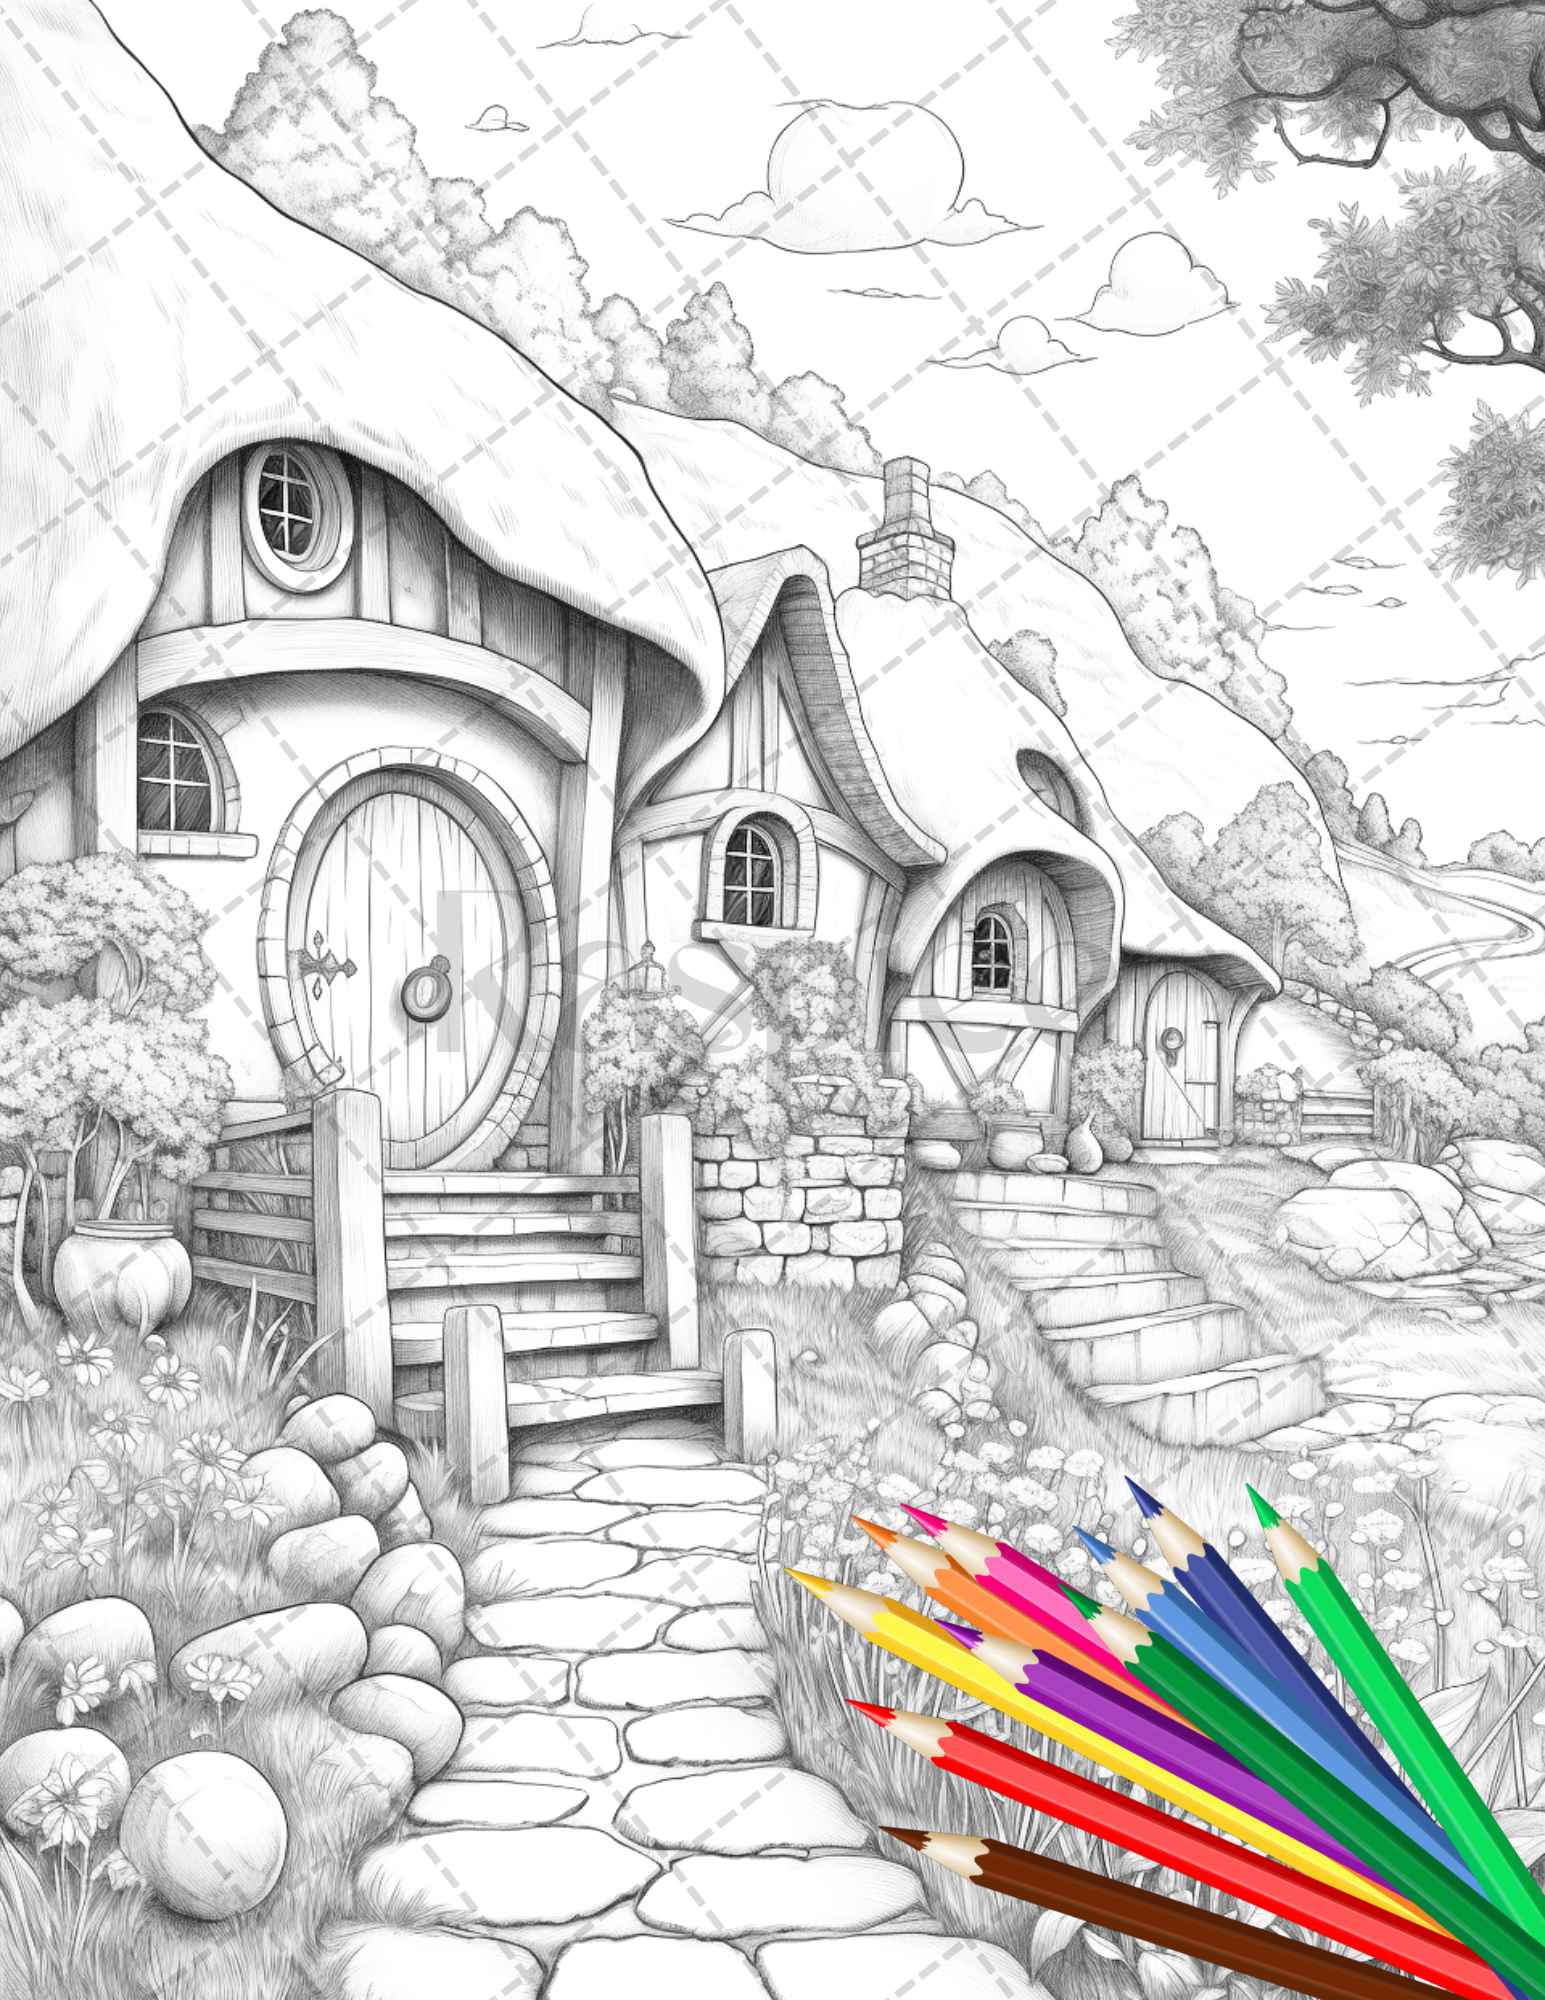 43 Enchanted Hobbiton Houses Grayscale Coloring Pages Printable for Adults, PDF File Instant Download - raspiee